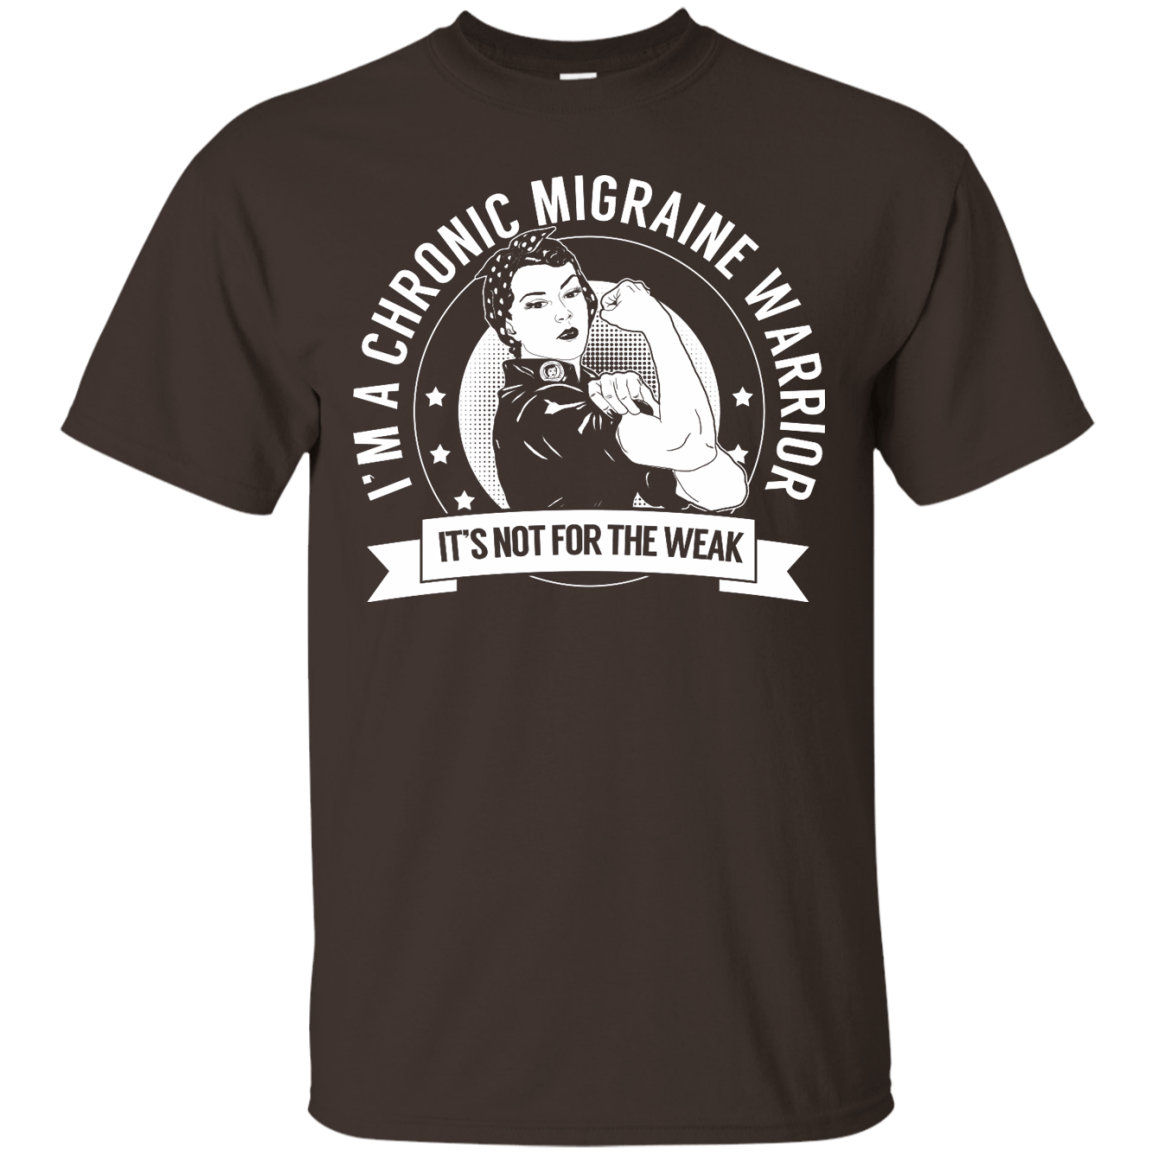 Chronic Migraine Warrior Not For The Weak Unisex Shirt - The Unchargeables